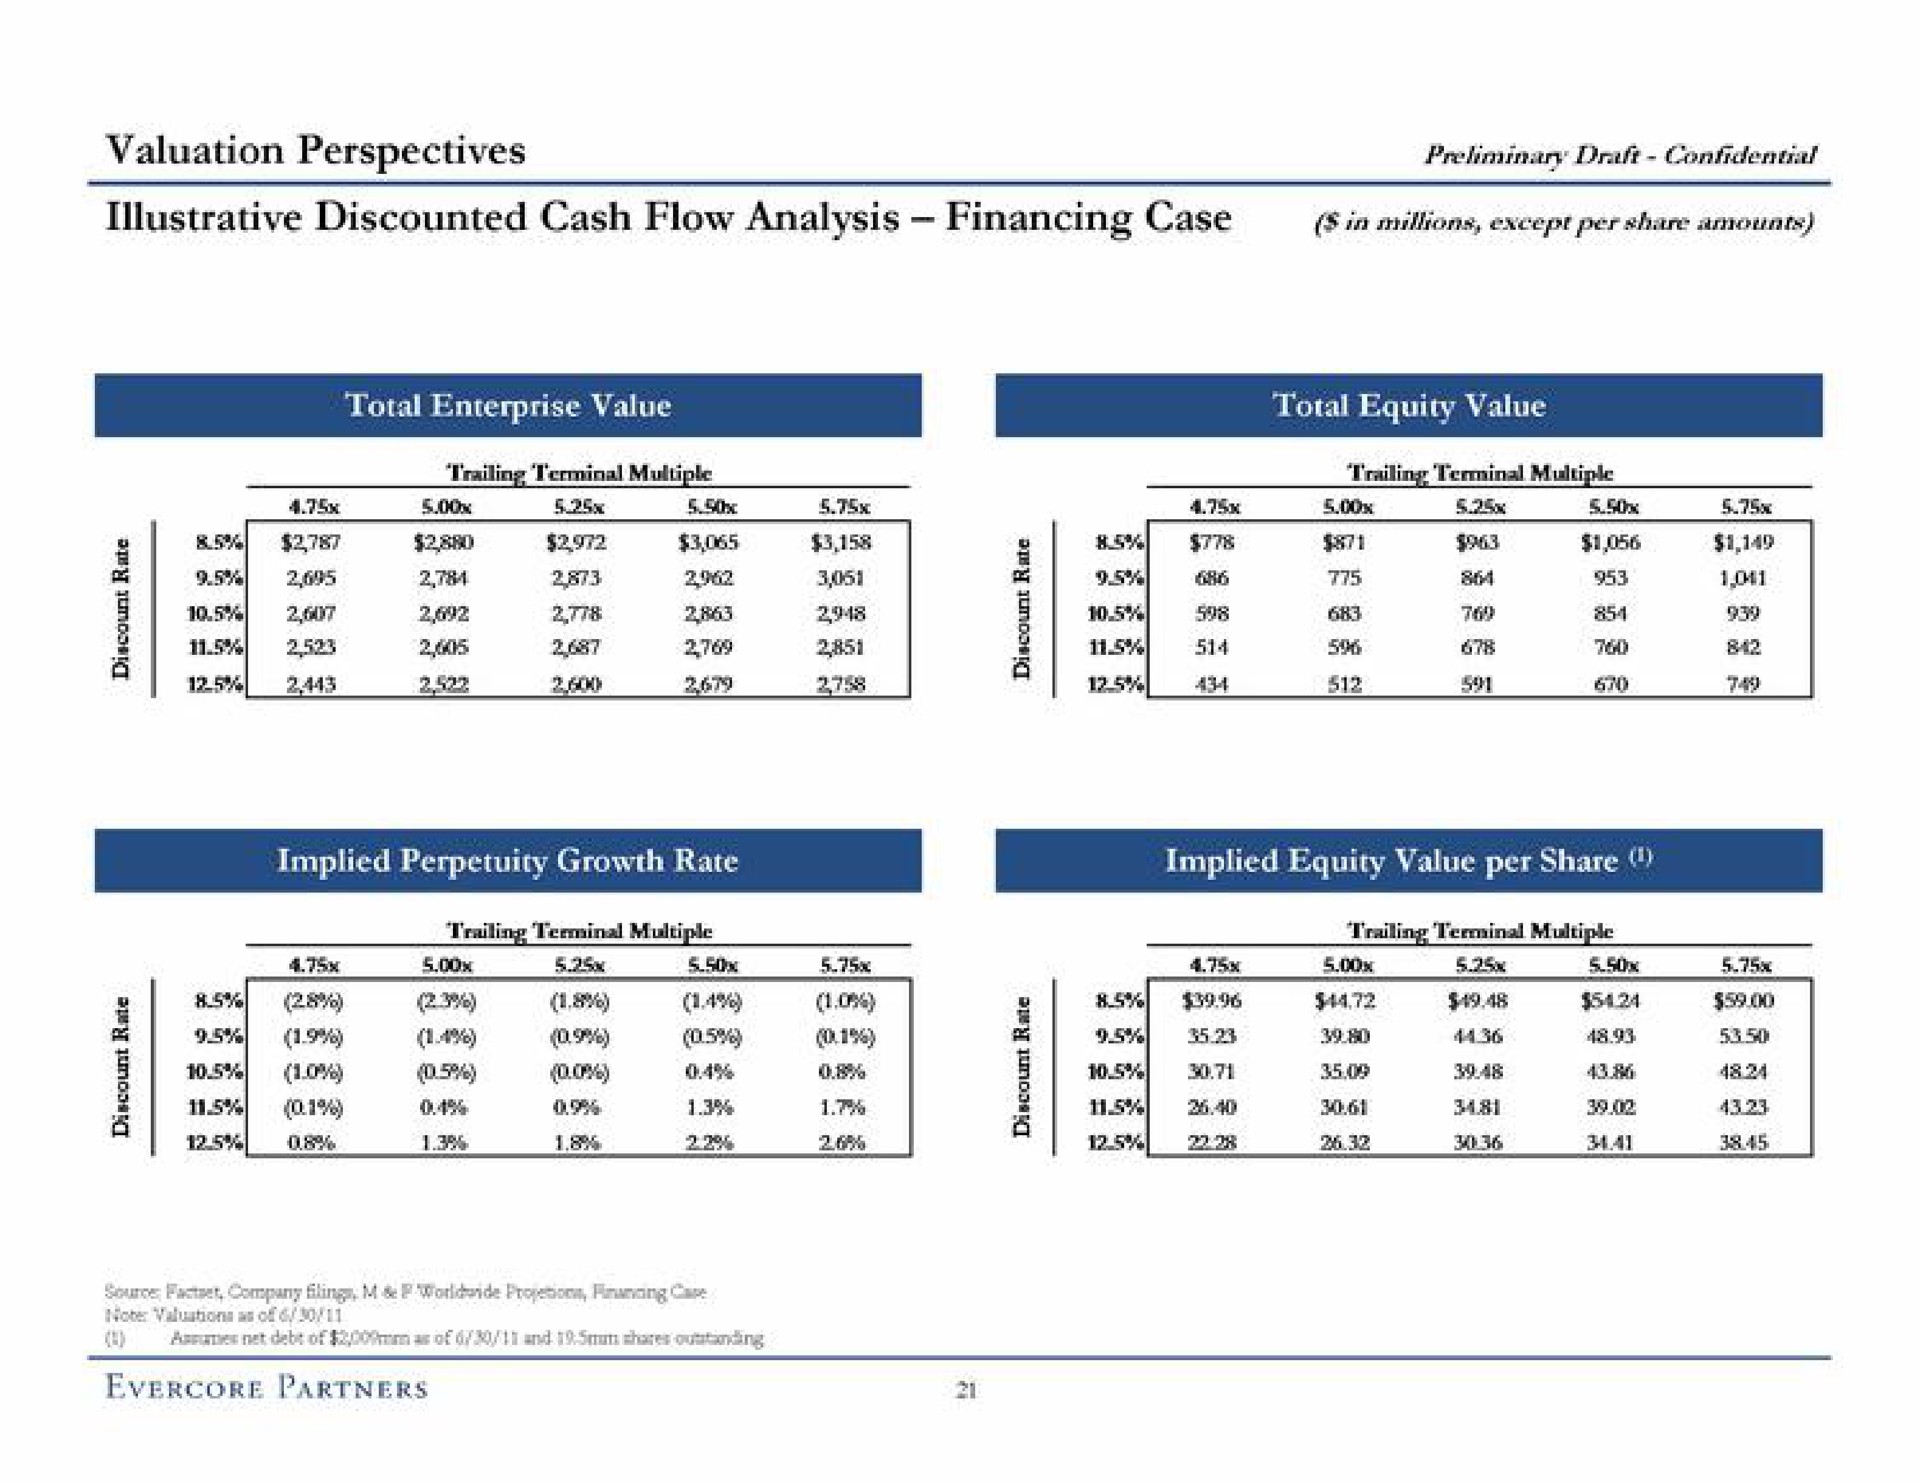 valuation perspectives preliminary draft confidential illustrative discounted cash flow analysis financing case millions except per share amounts | Evercore